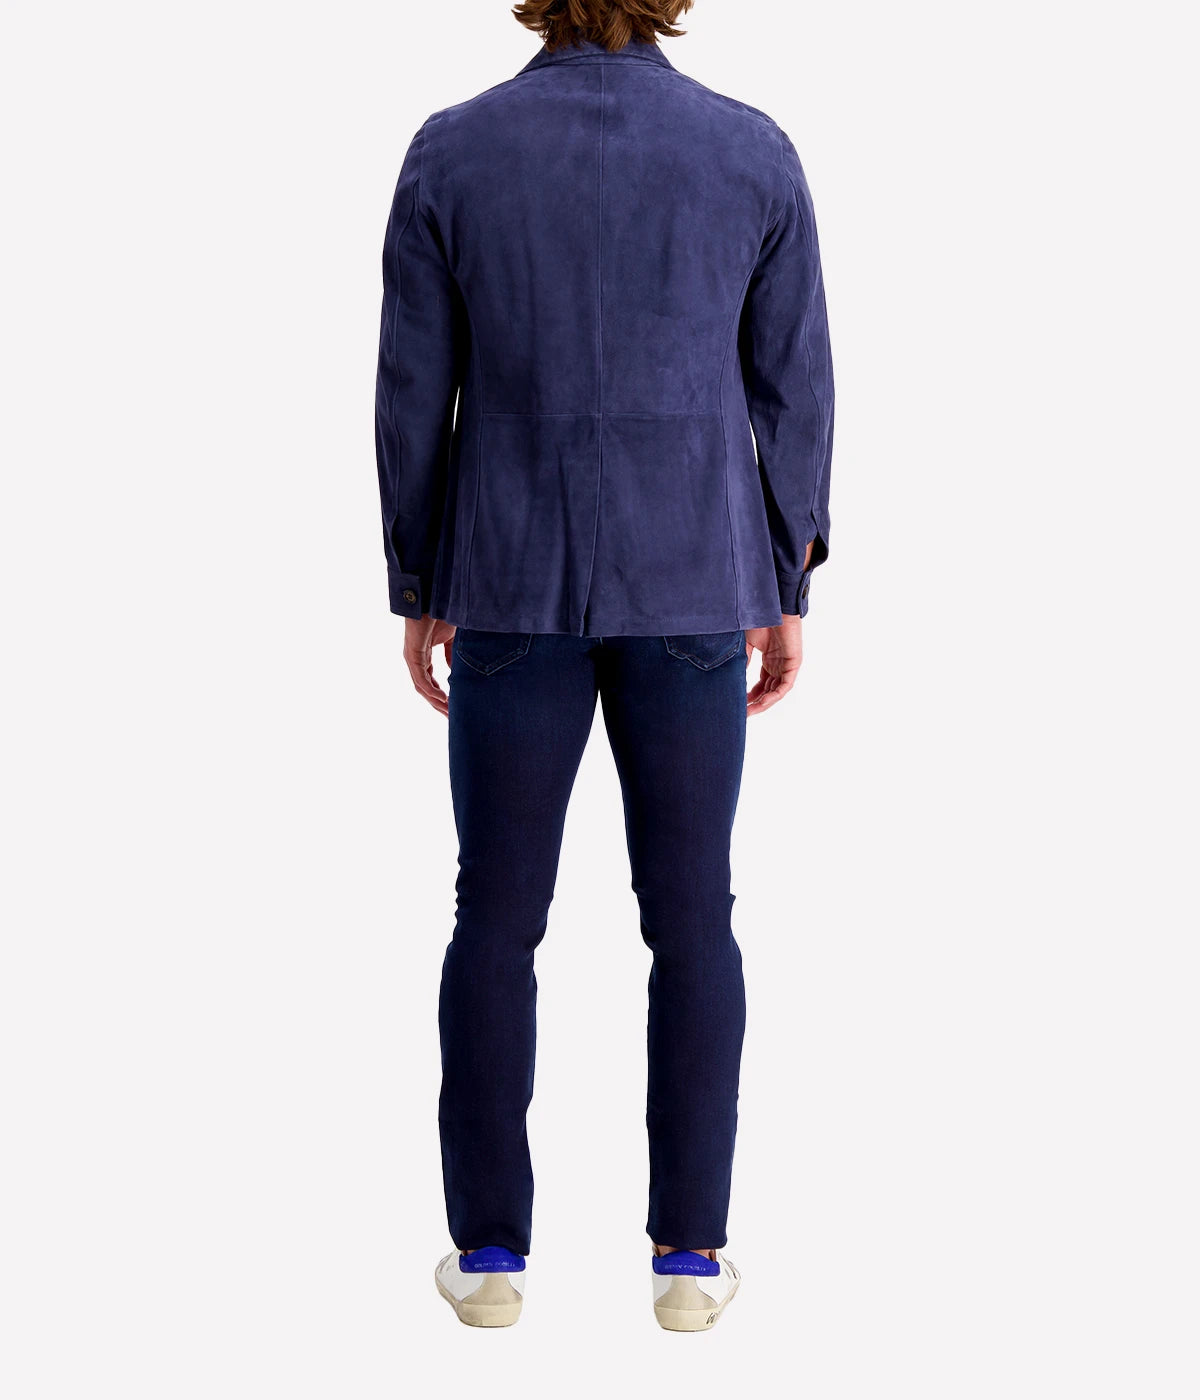 Two Pockets Nappa Suede Jacket in Blue